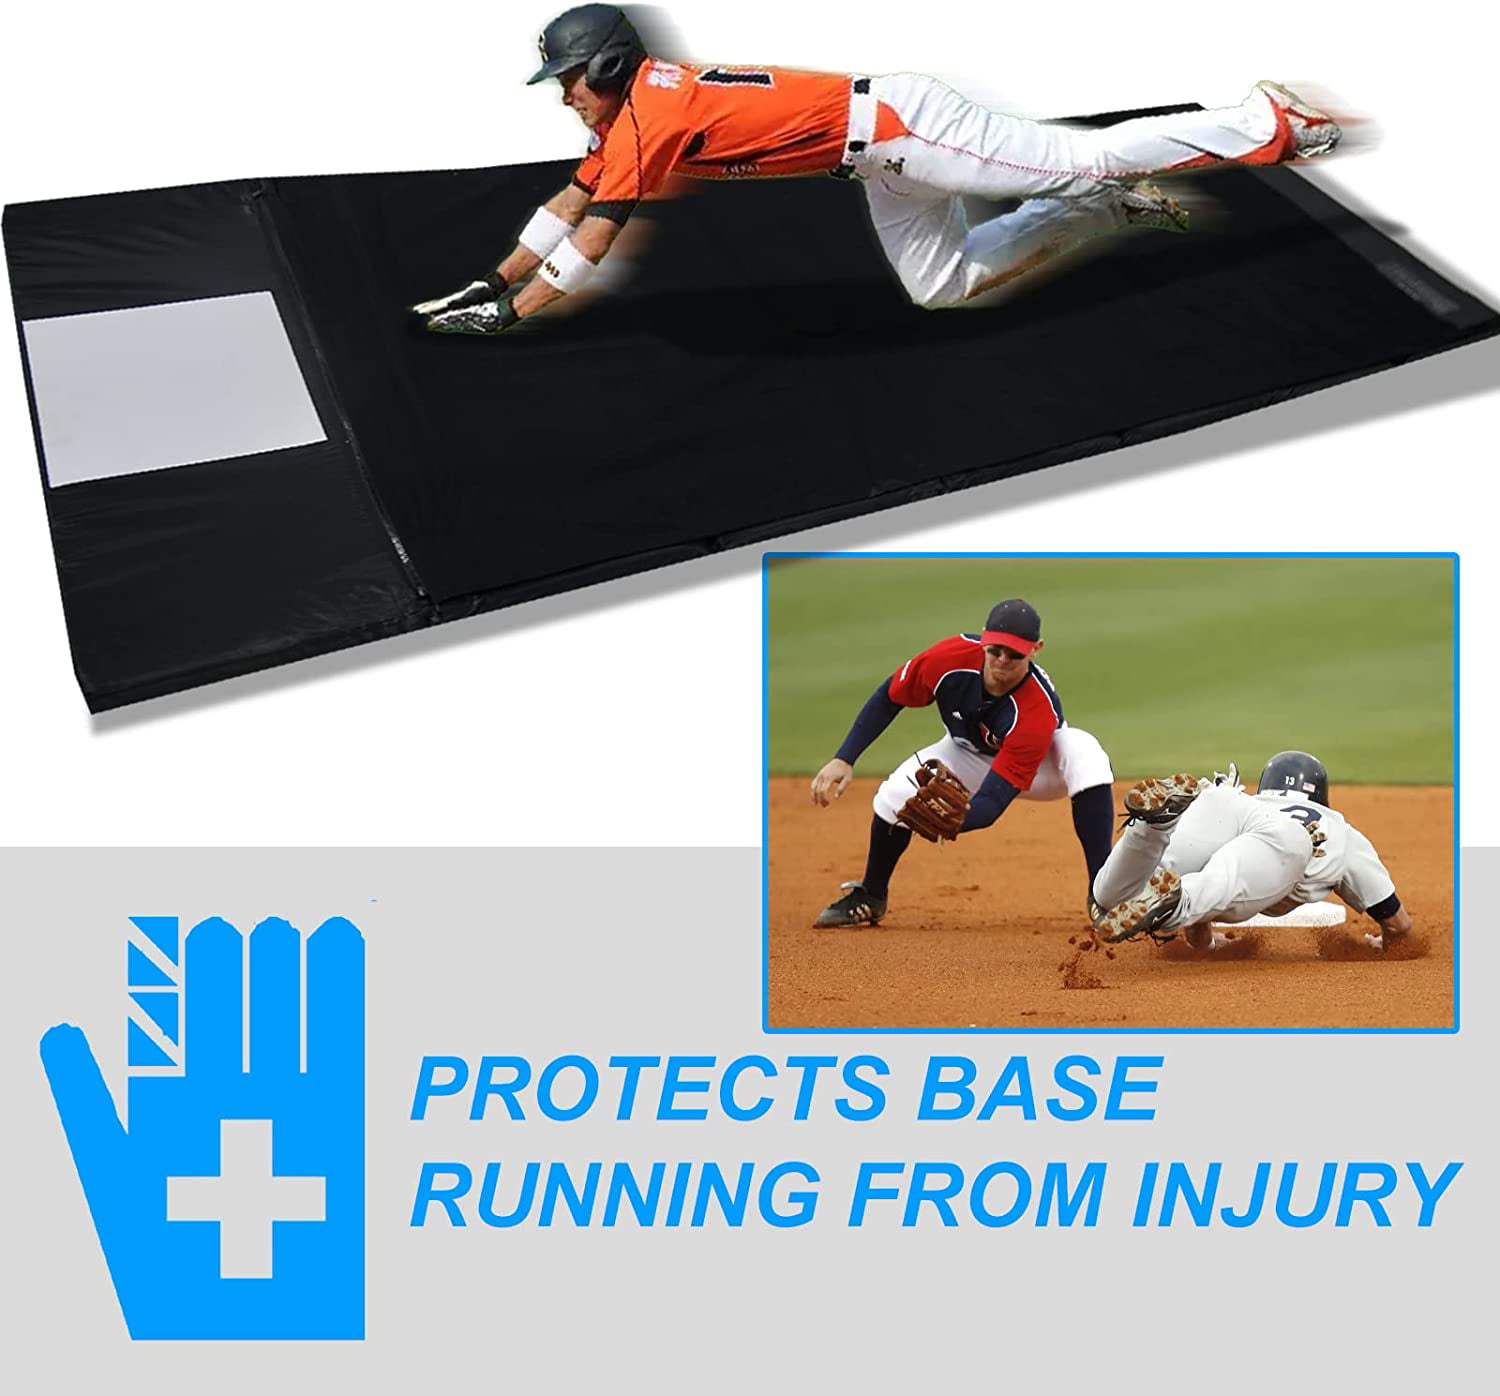 Andgoal Baseball Softball Sliding Mat - Durable Practice Mat for Indoor and Outdoor Sliding, Size: 124 x 43.3 x 1.7, Black